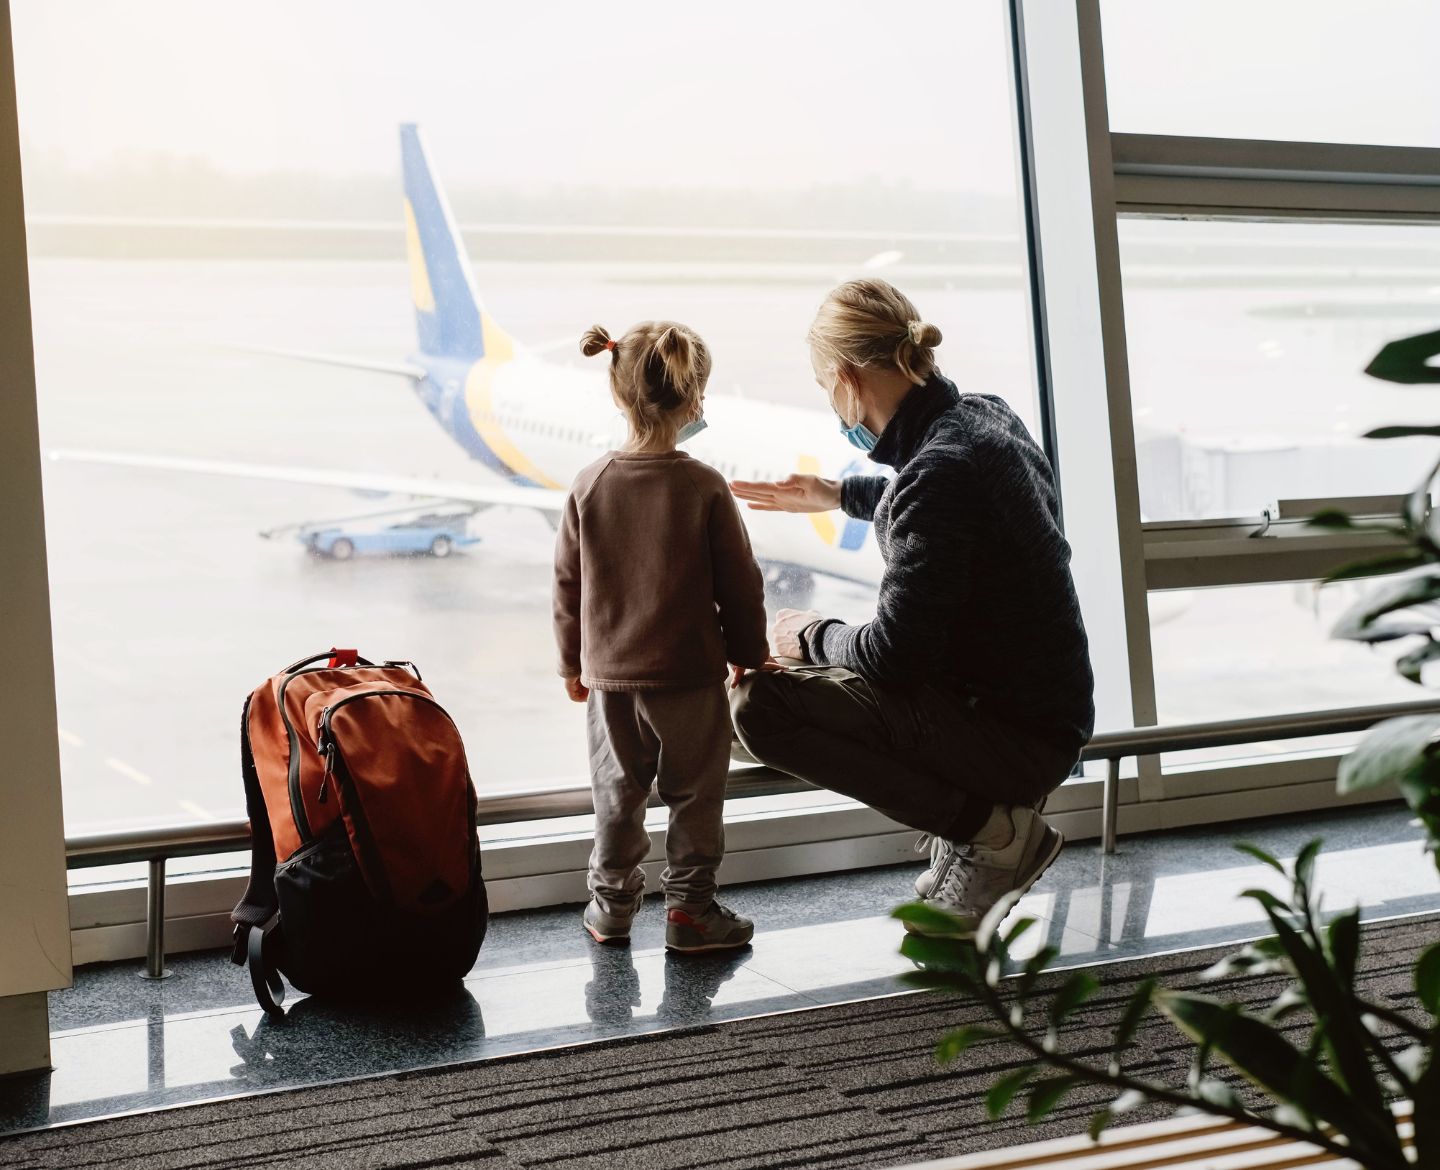 Mother with child in airport looking at airplane